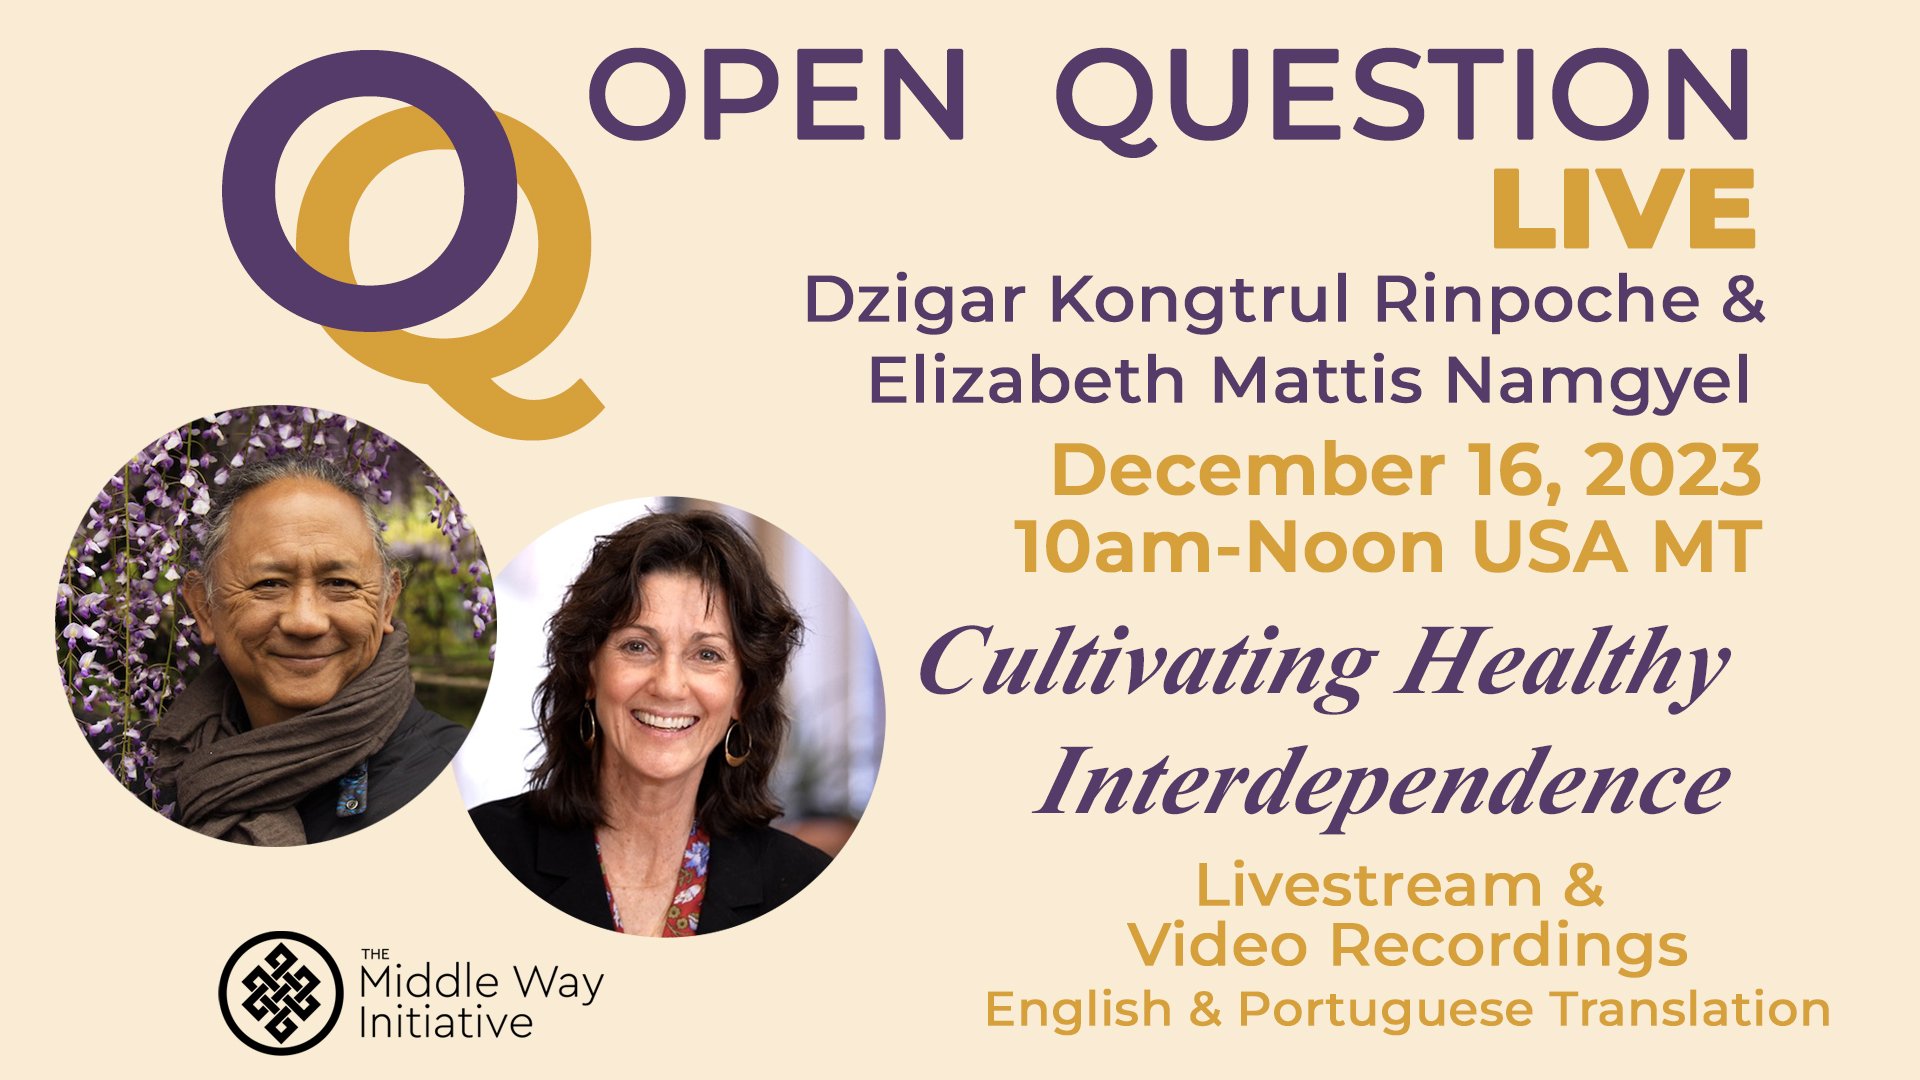 OQ Live Conversation: Cultivating Healthy Interdependence with